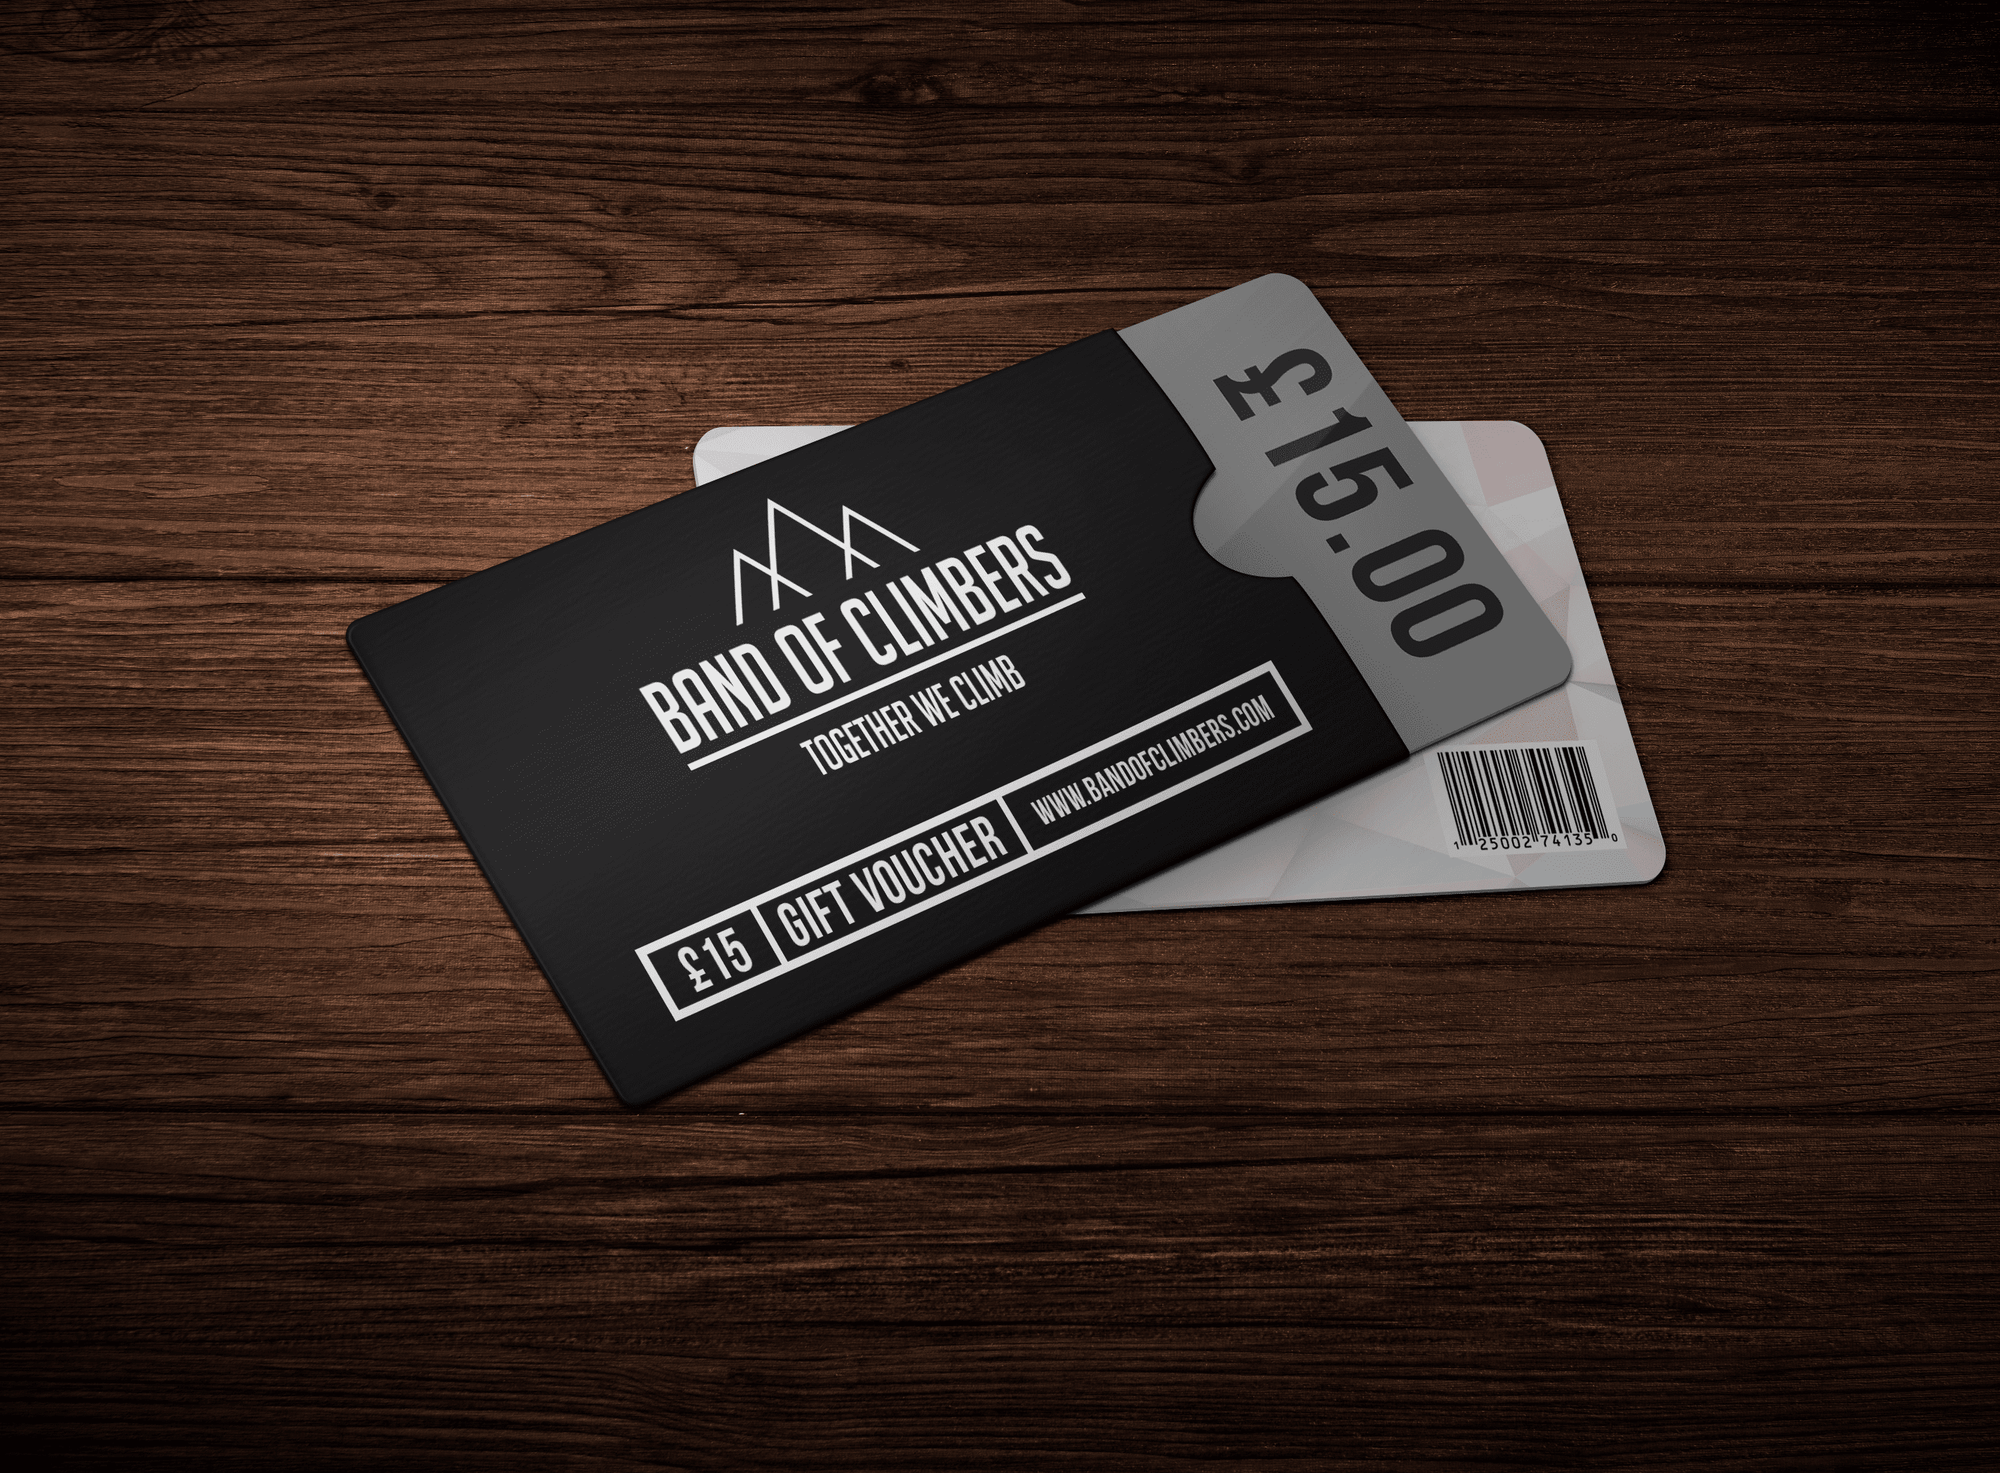 Band of Climbers Gift Card